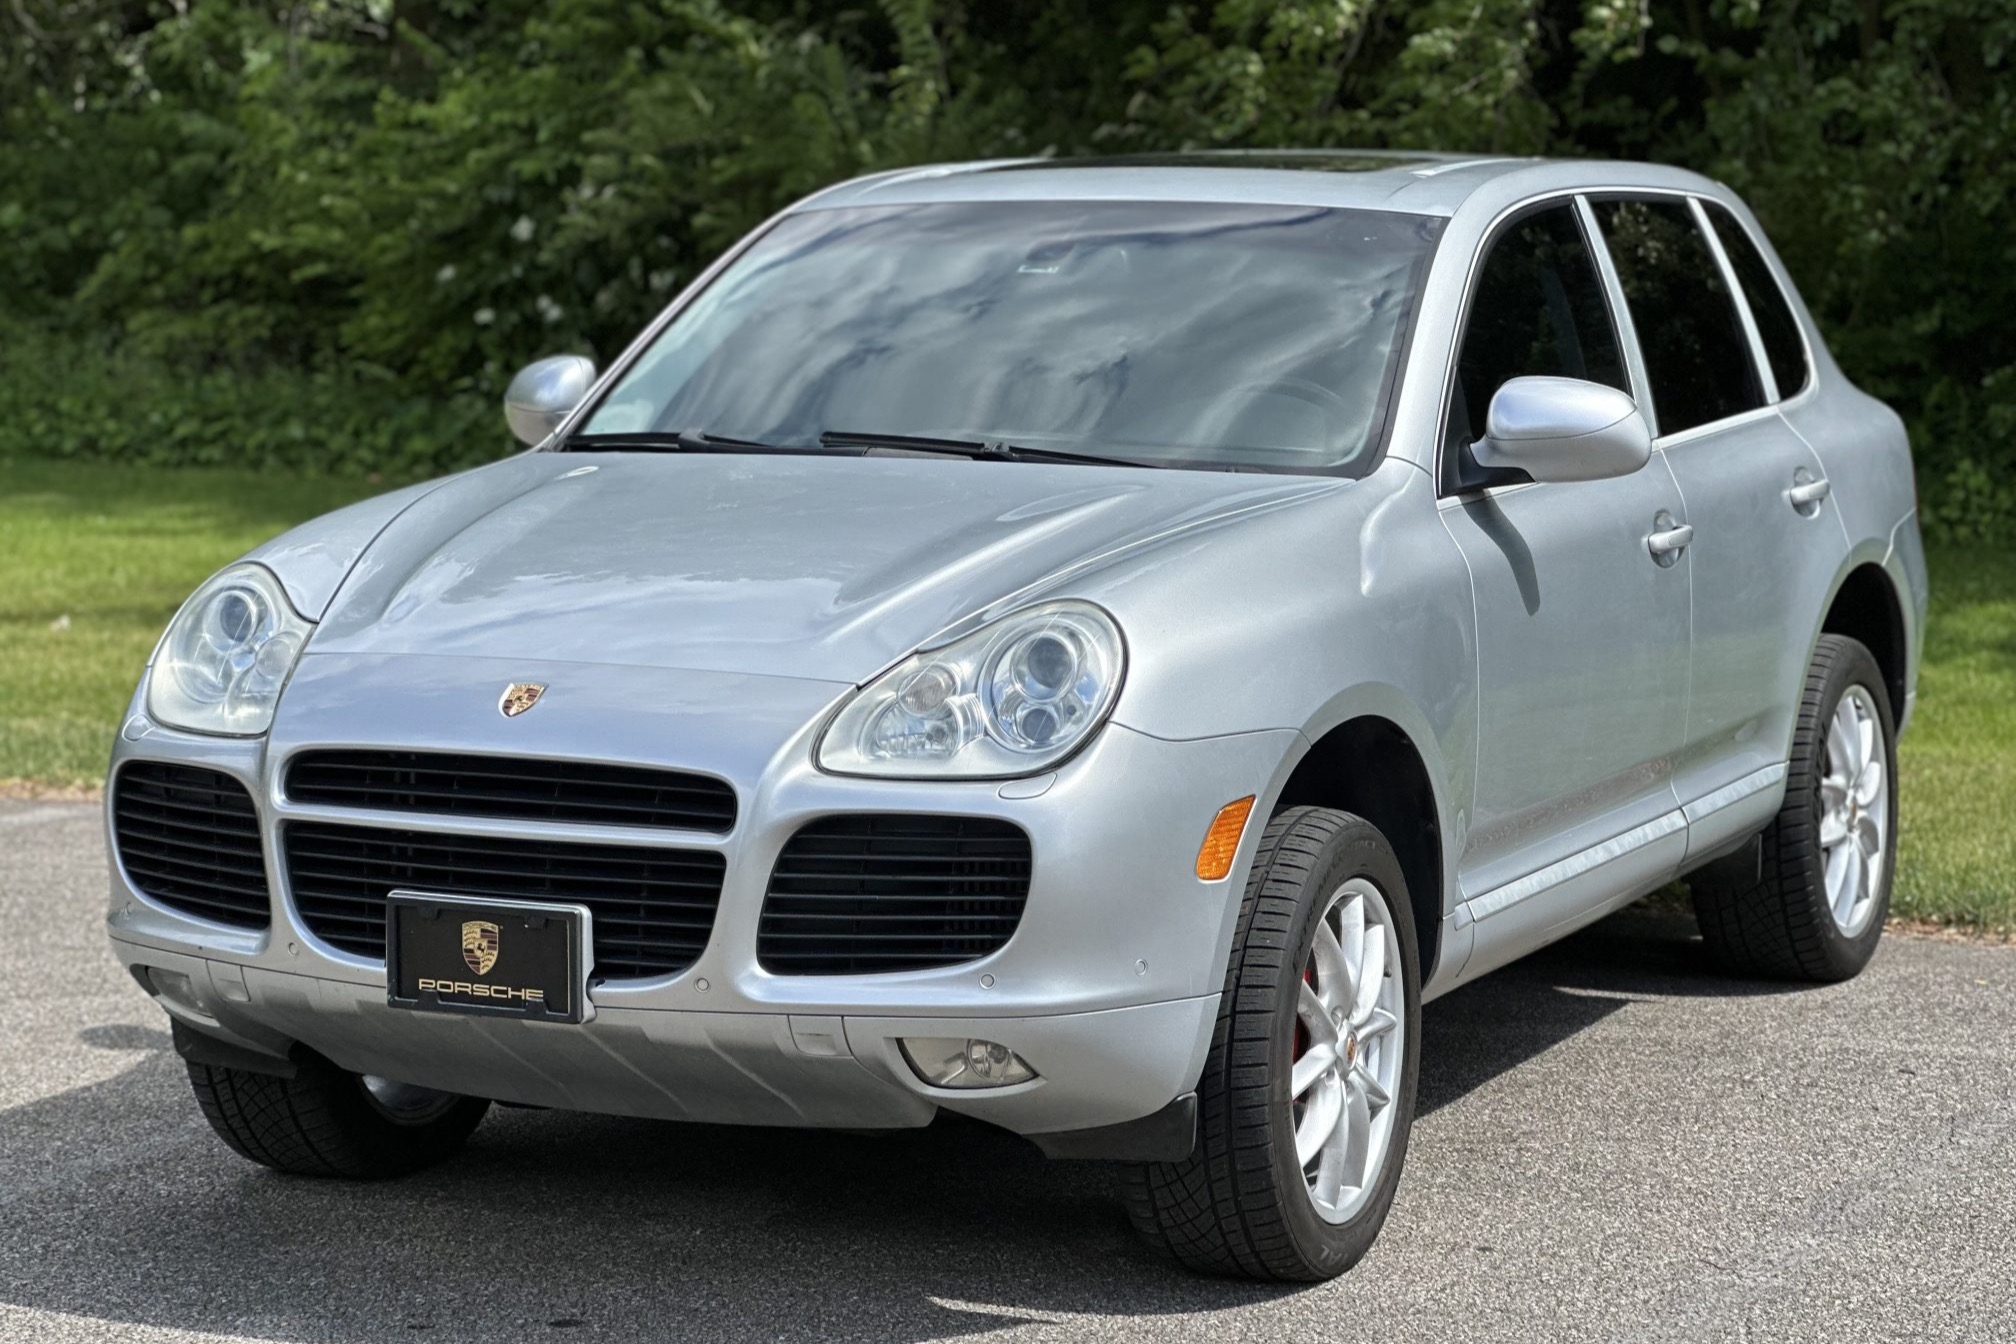 Used 2004 Porsche Cayenne Turbo Review